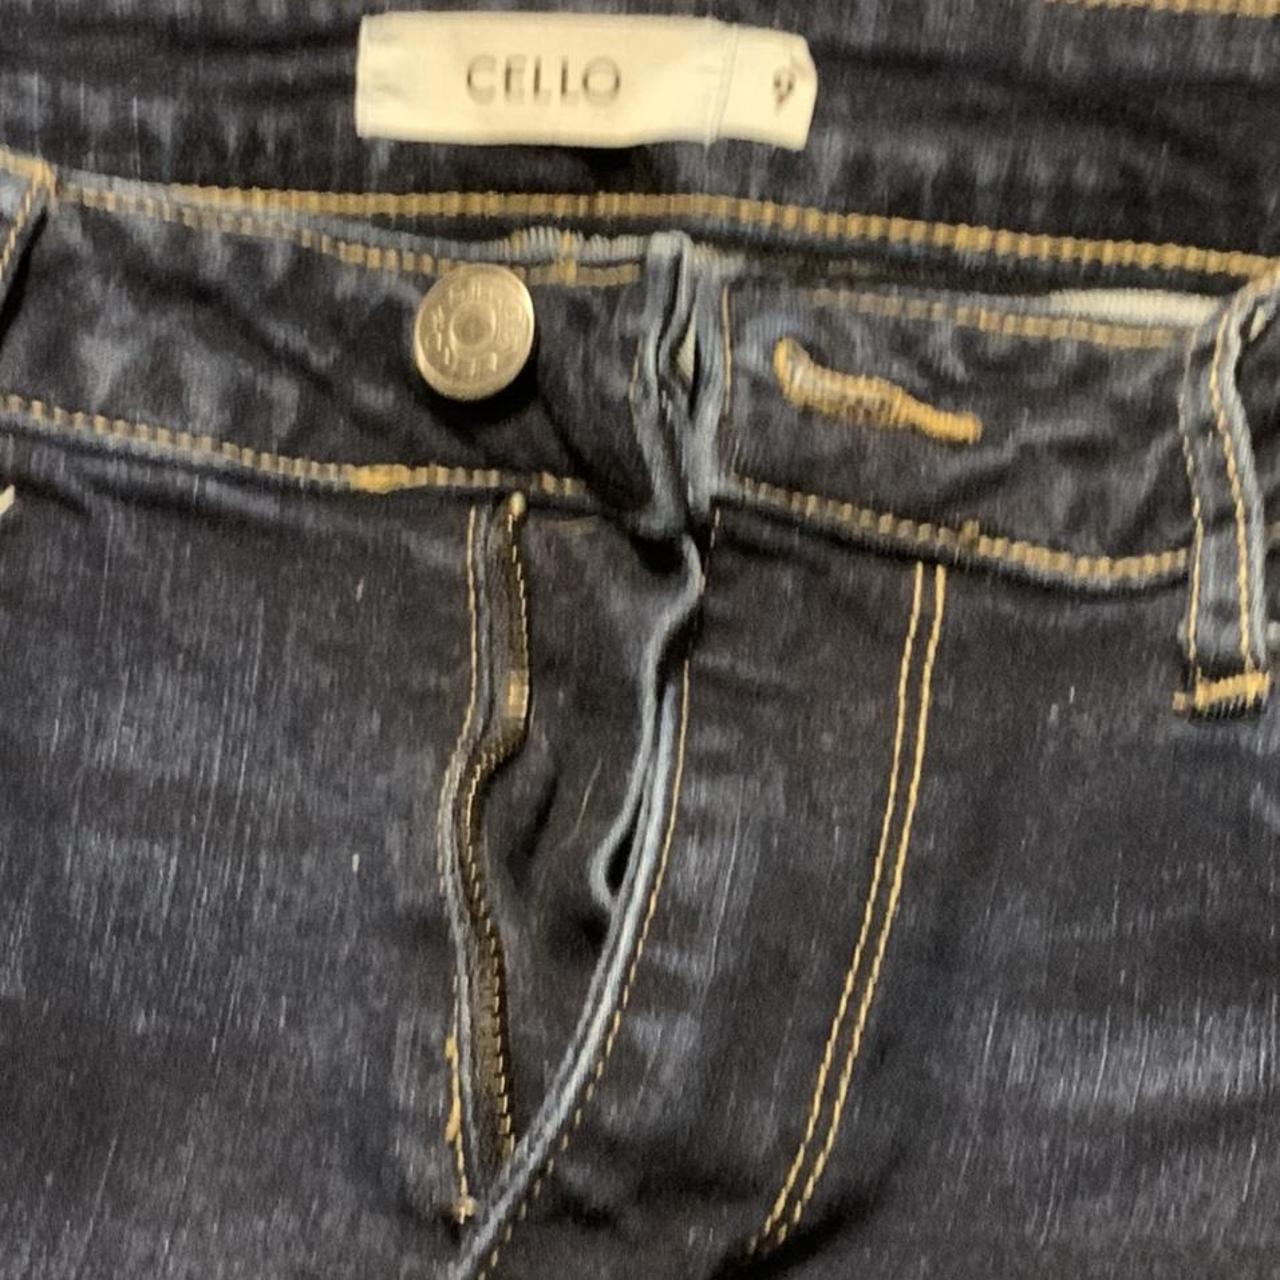 Product Image 3 - Cello Jeans, Preowned no stains